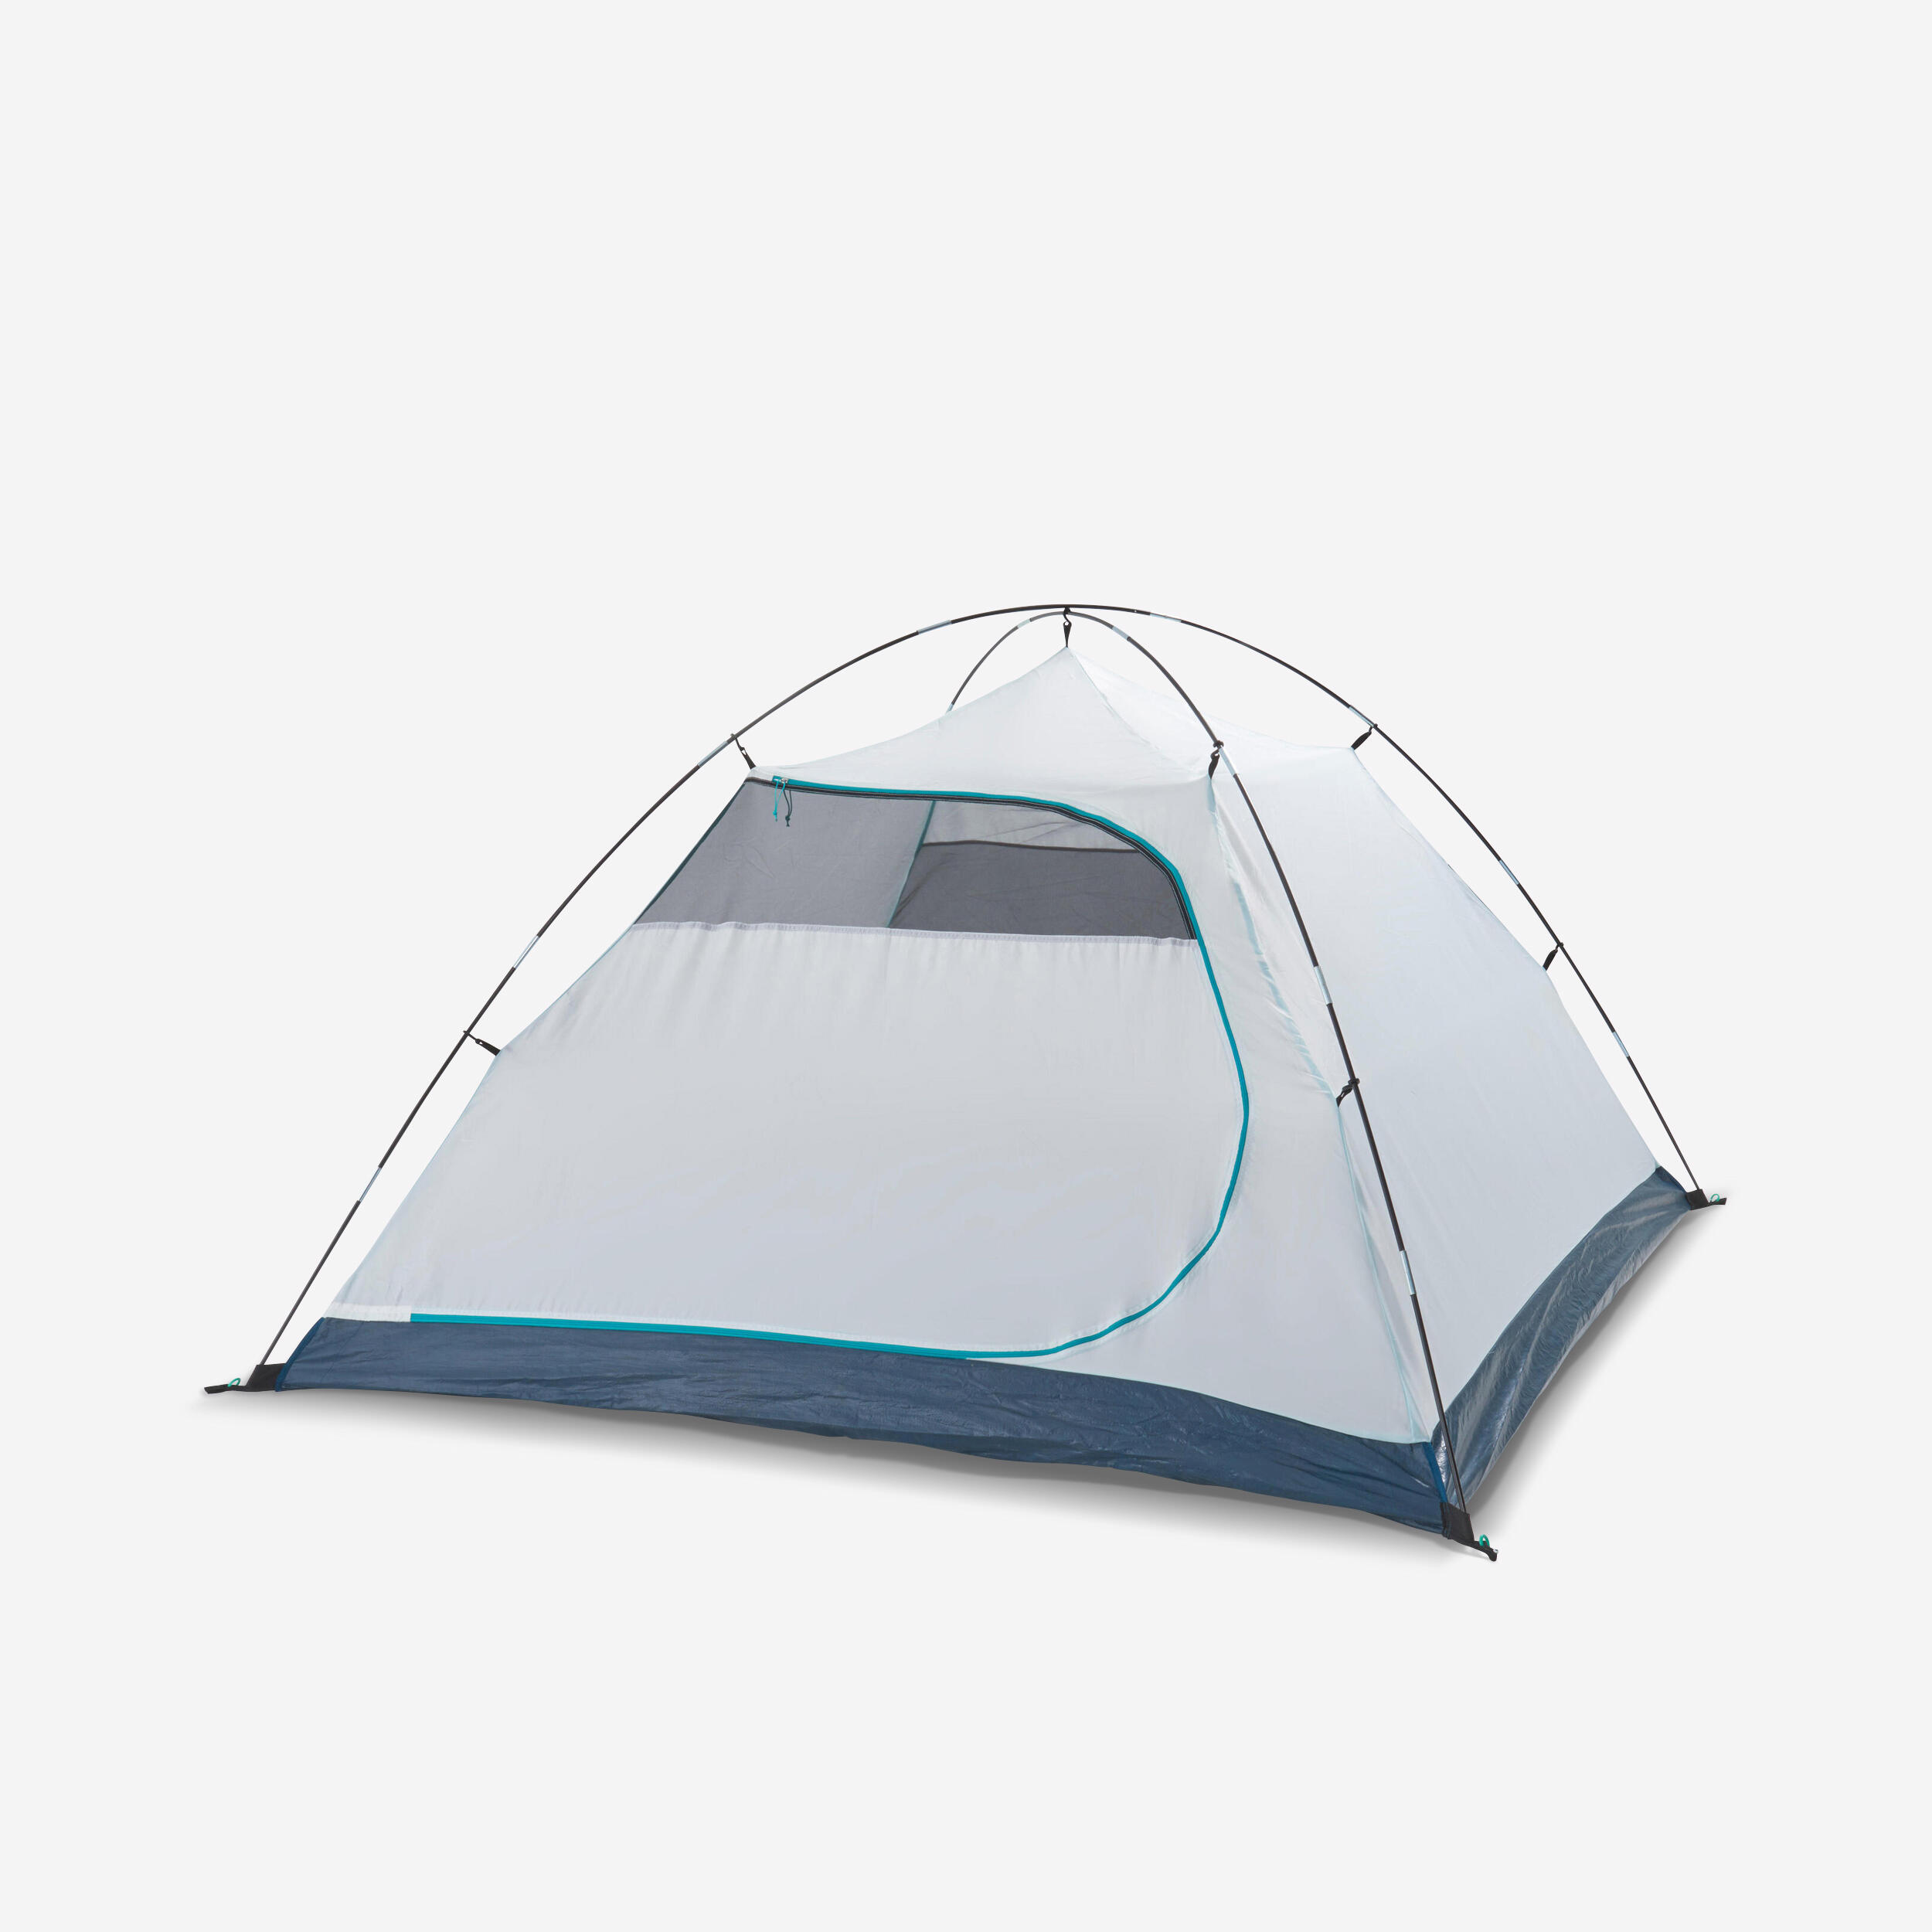 QUECHUA BEDROOM - SPARE PART FOR THE MH100 3 PERSON TENT